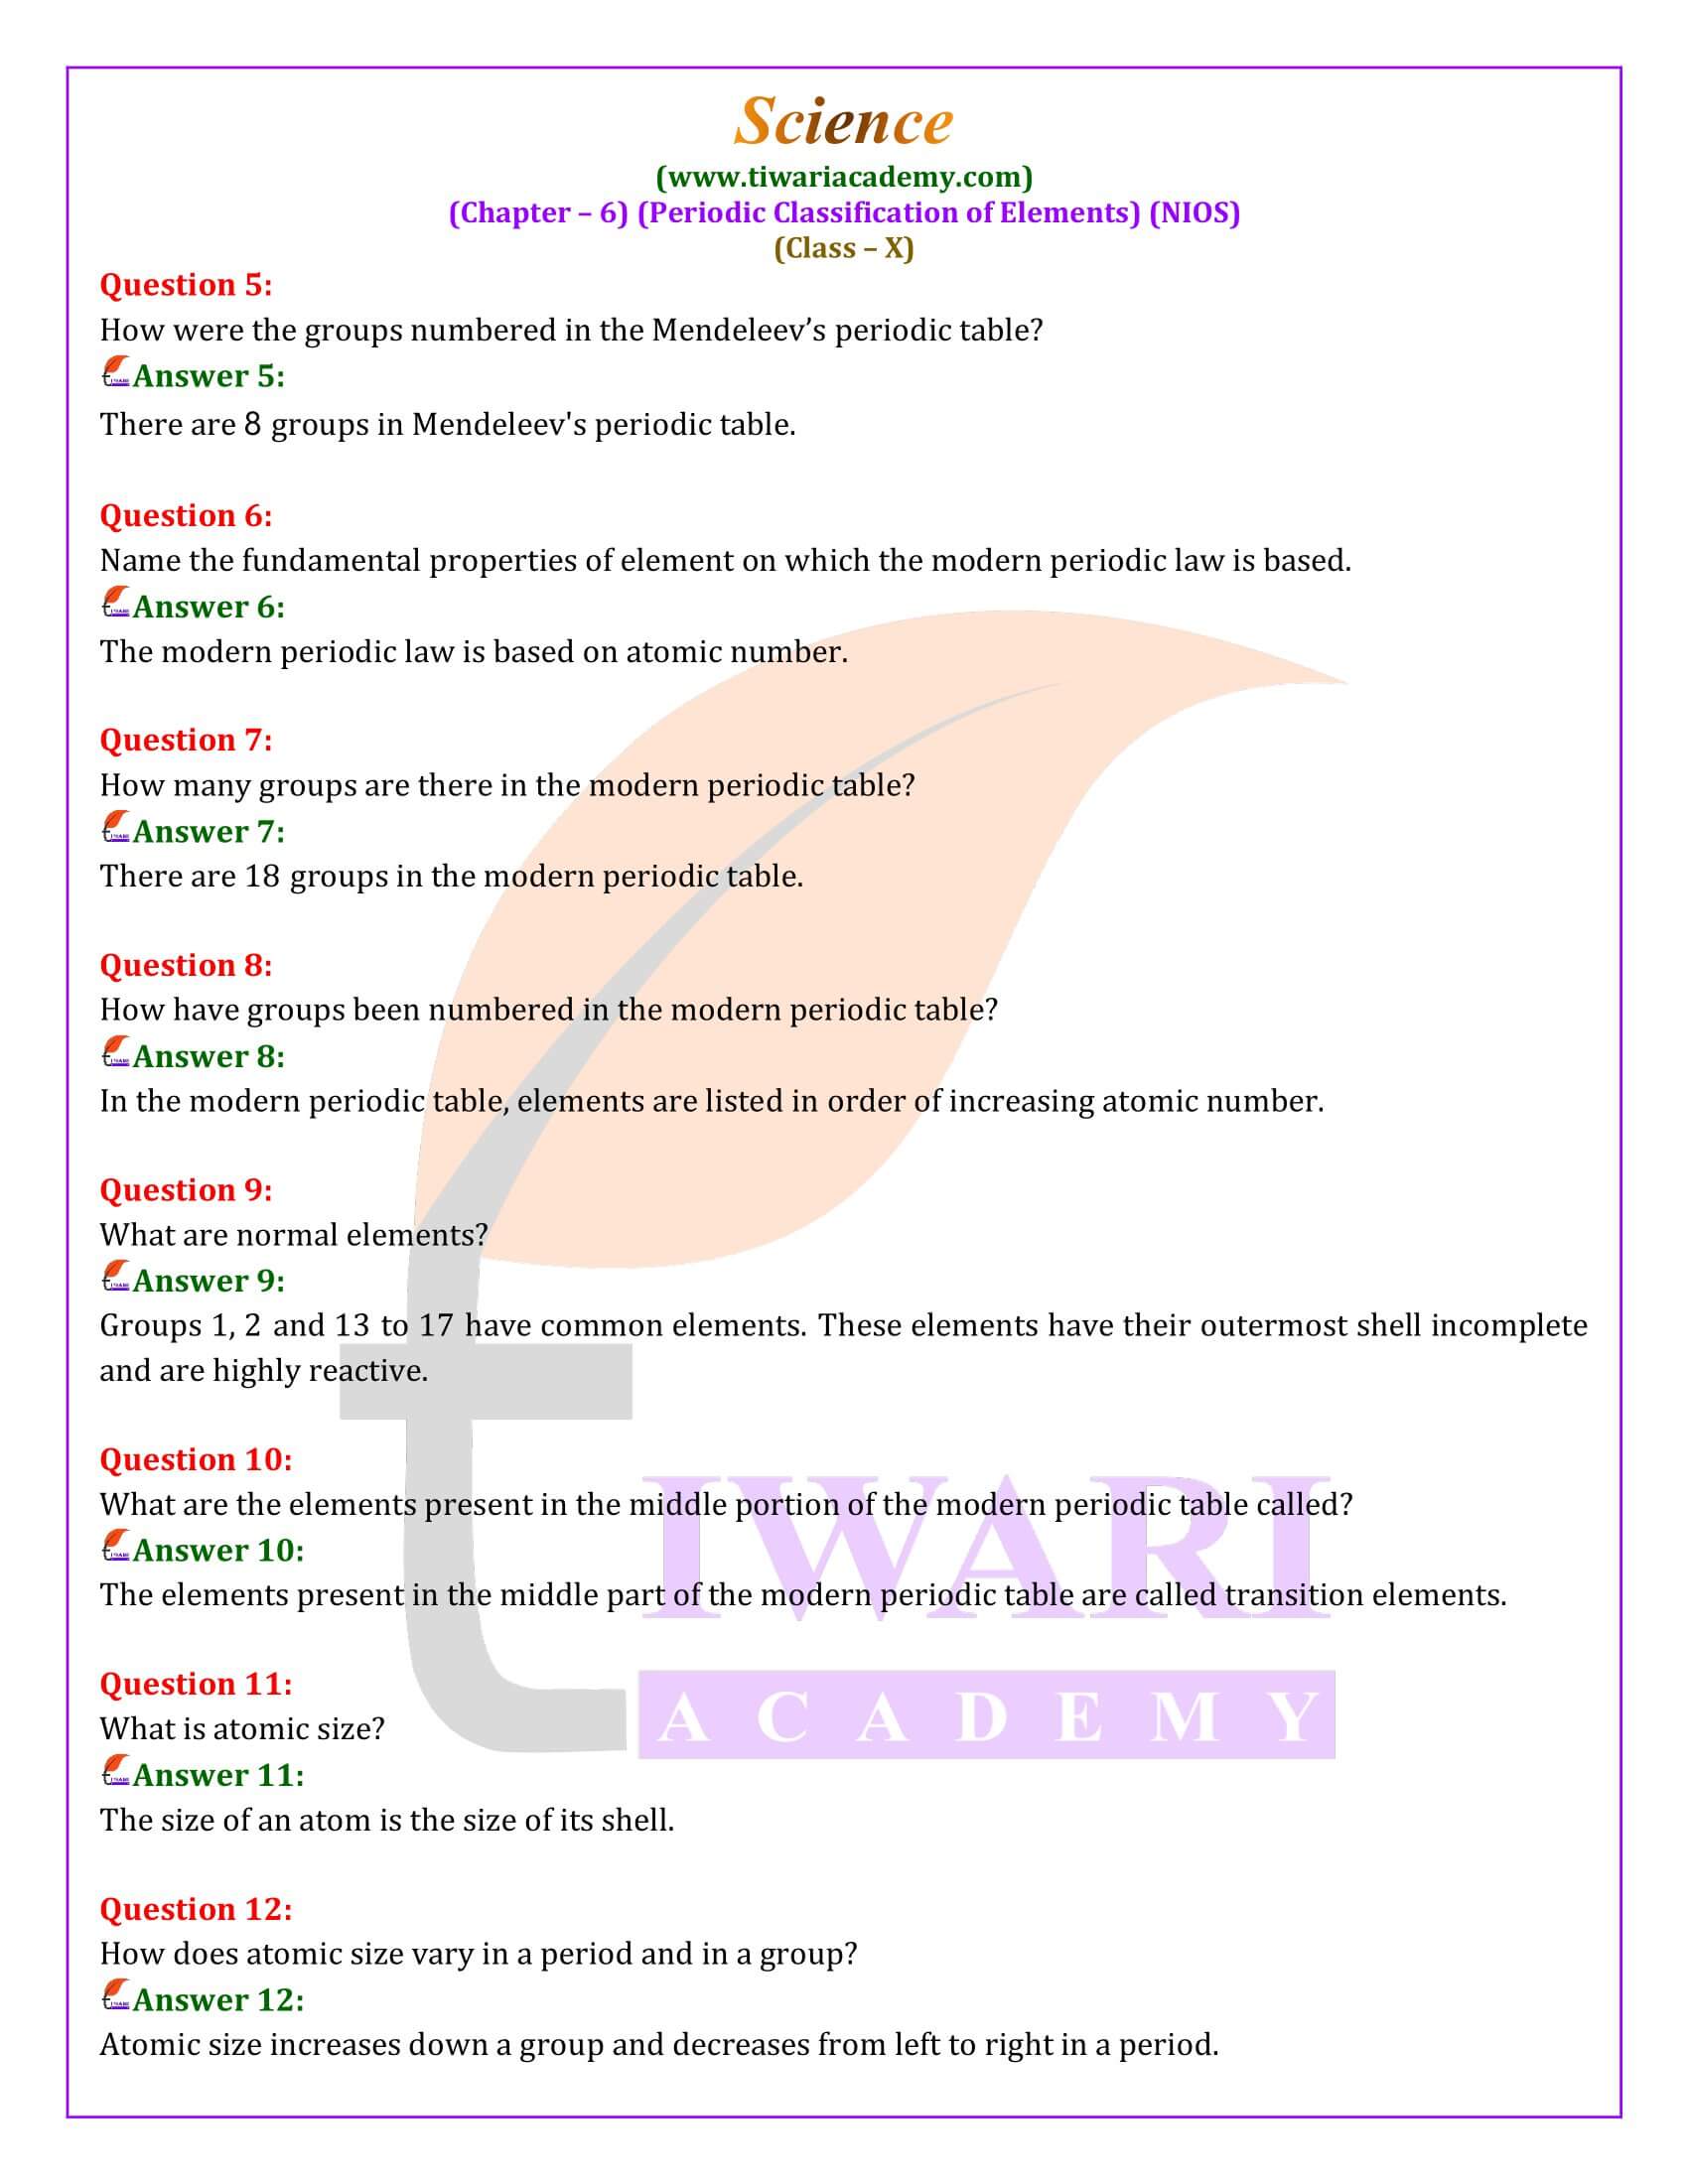 NIOS Class 10 Science Chapter 6 Periodic Classification